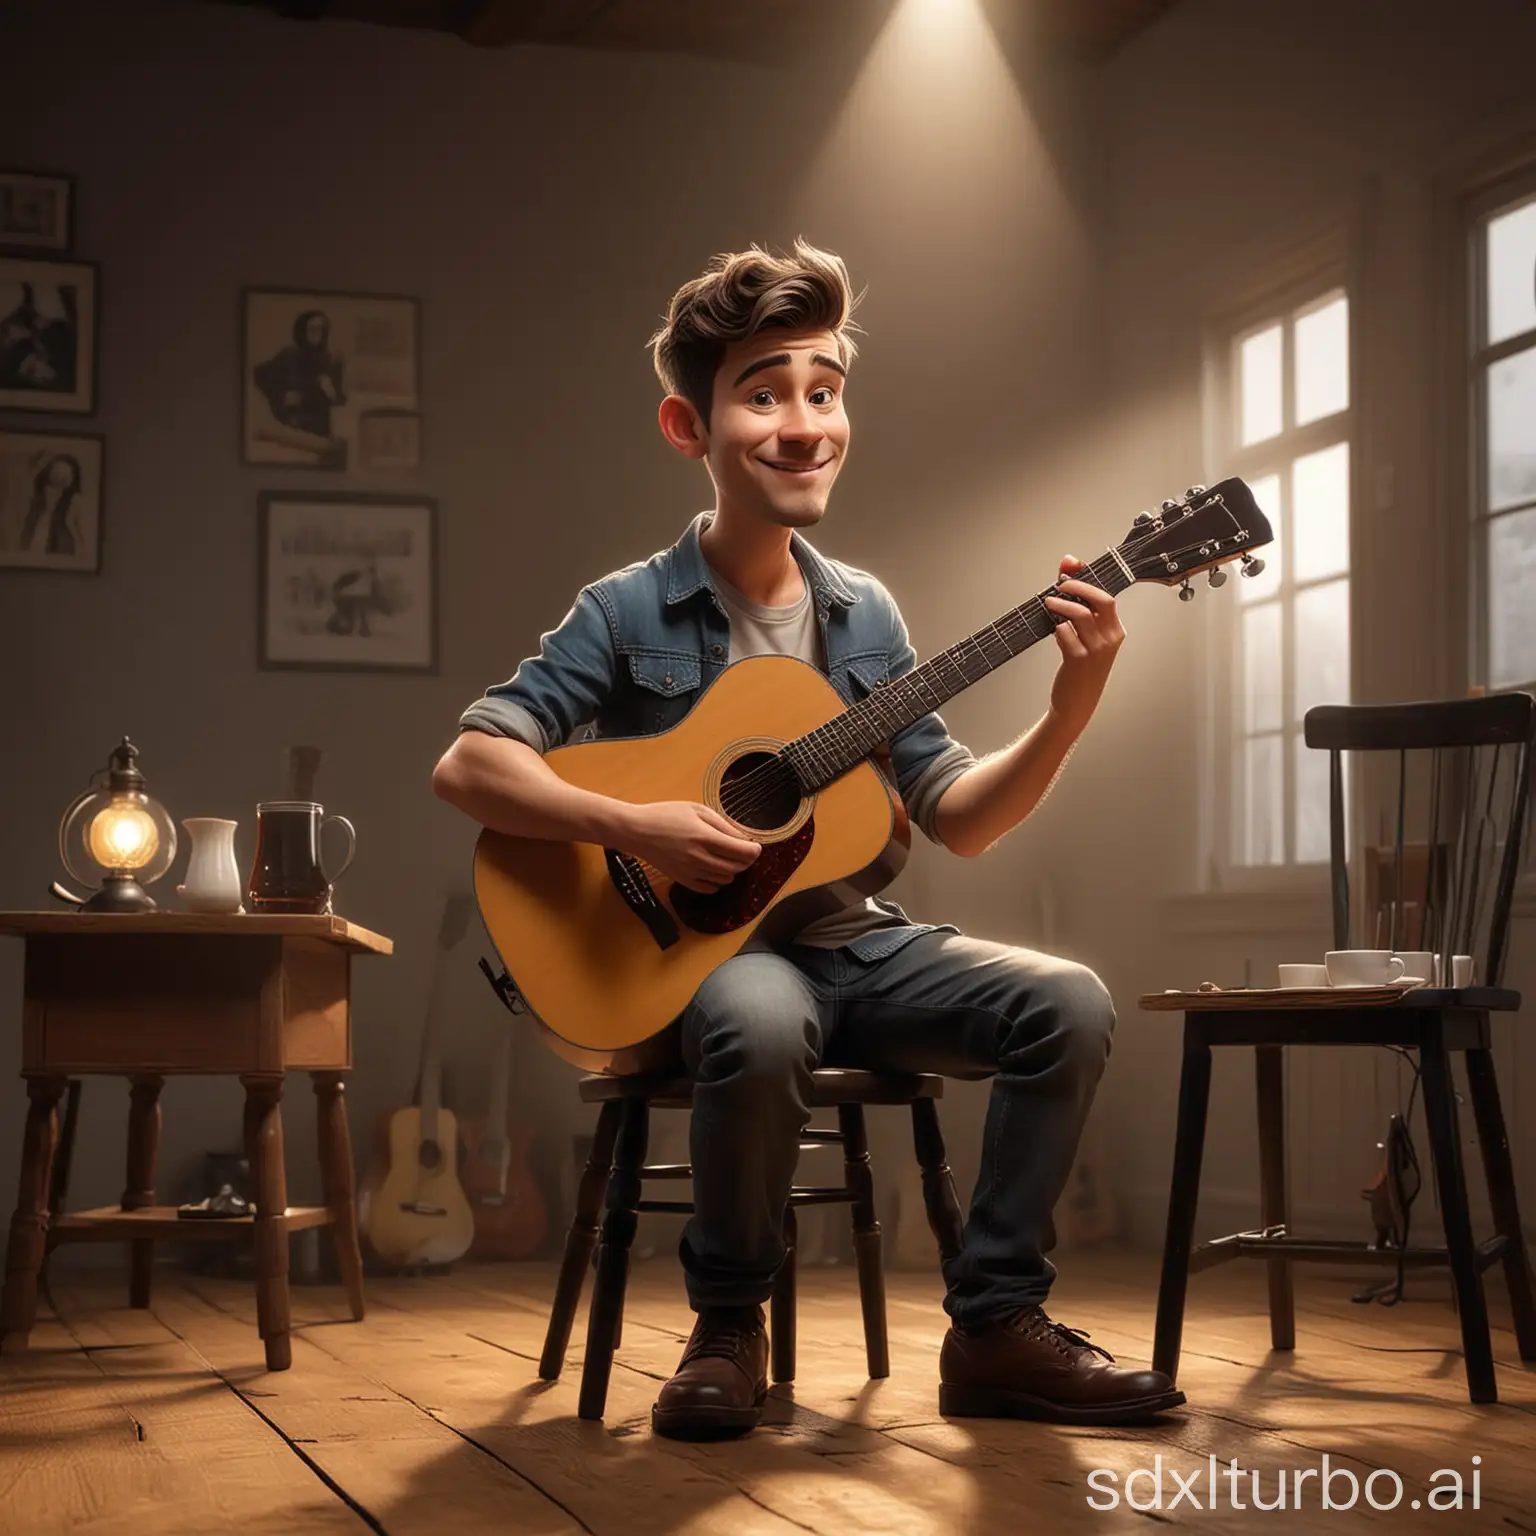 Create a realistic 3D cartoon style full body caricature with a big head. A young man is sitting in an old black wooden chair playing an acoustic guitar facing the camera. In front of him you can see a clear glass containing a black liquid like coffee which is placed on an old brown wooden table. Beside him there was a young woman sitting enjoying the song. A soft silhouette of light from above illuminates the young man who is busy playing the guitar. Dramatic lighting adds to the beauty of the atmosphere in the picture. Use soft photography lighting. Light from above, from behind, UHD, HD, high quality image.